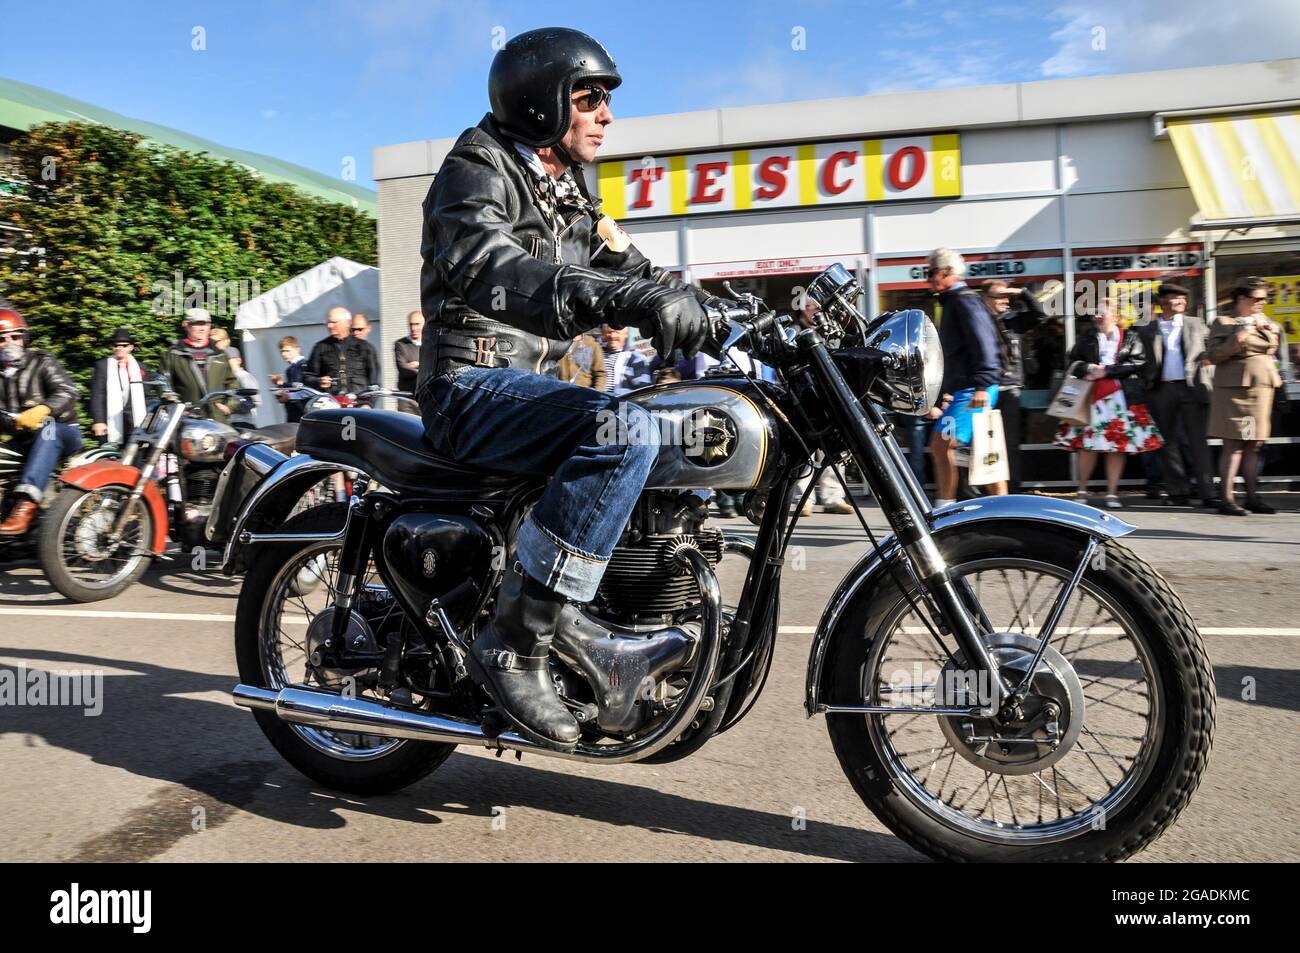 Period motorcyclist in retro biker gear at the Goodwood Revival outside the retro Tesco shop, store. Vintage, classic, timeless. Step back in time Stock Photo